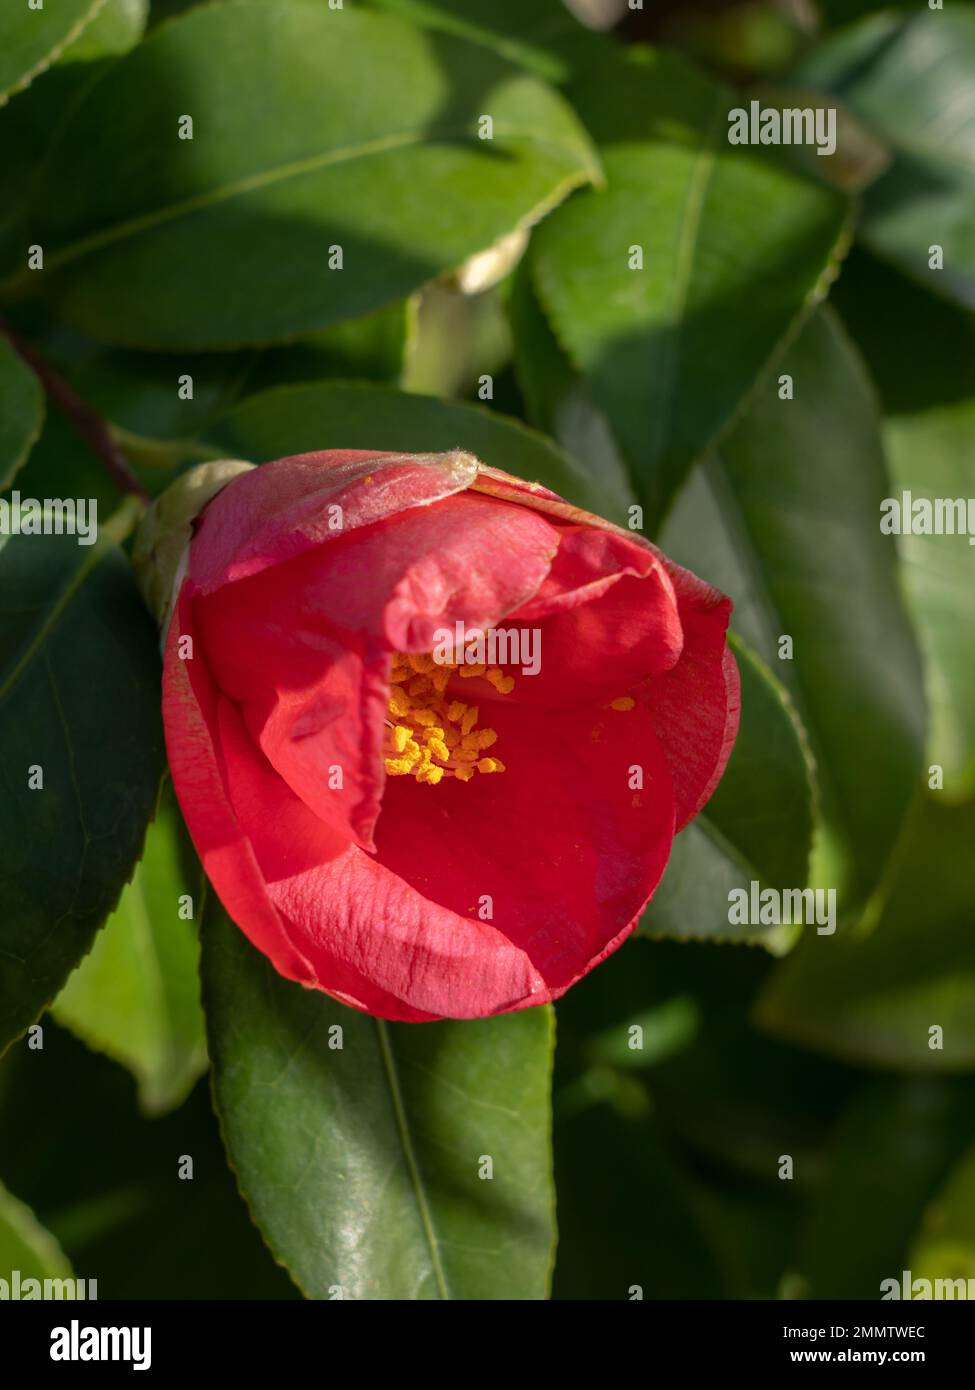 Closeup view of bright red pink flower of camellia japonica bush blooming in winter on foliage background Stock Photo